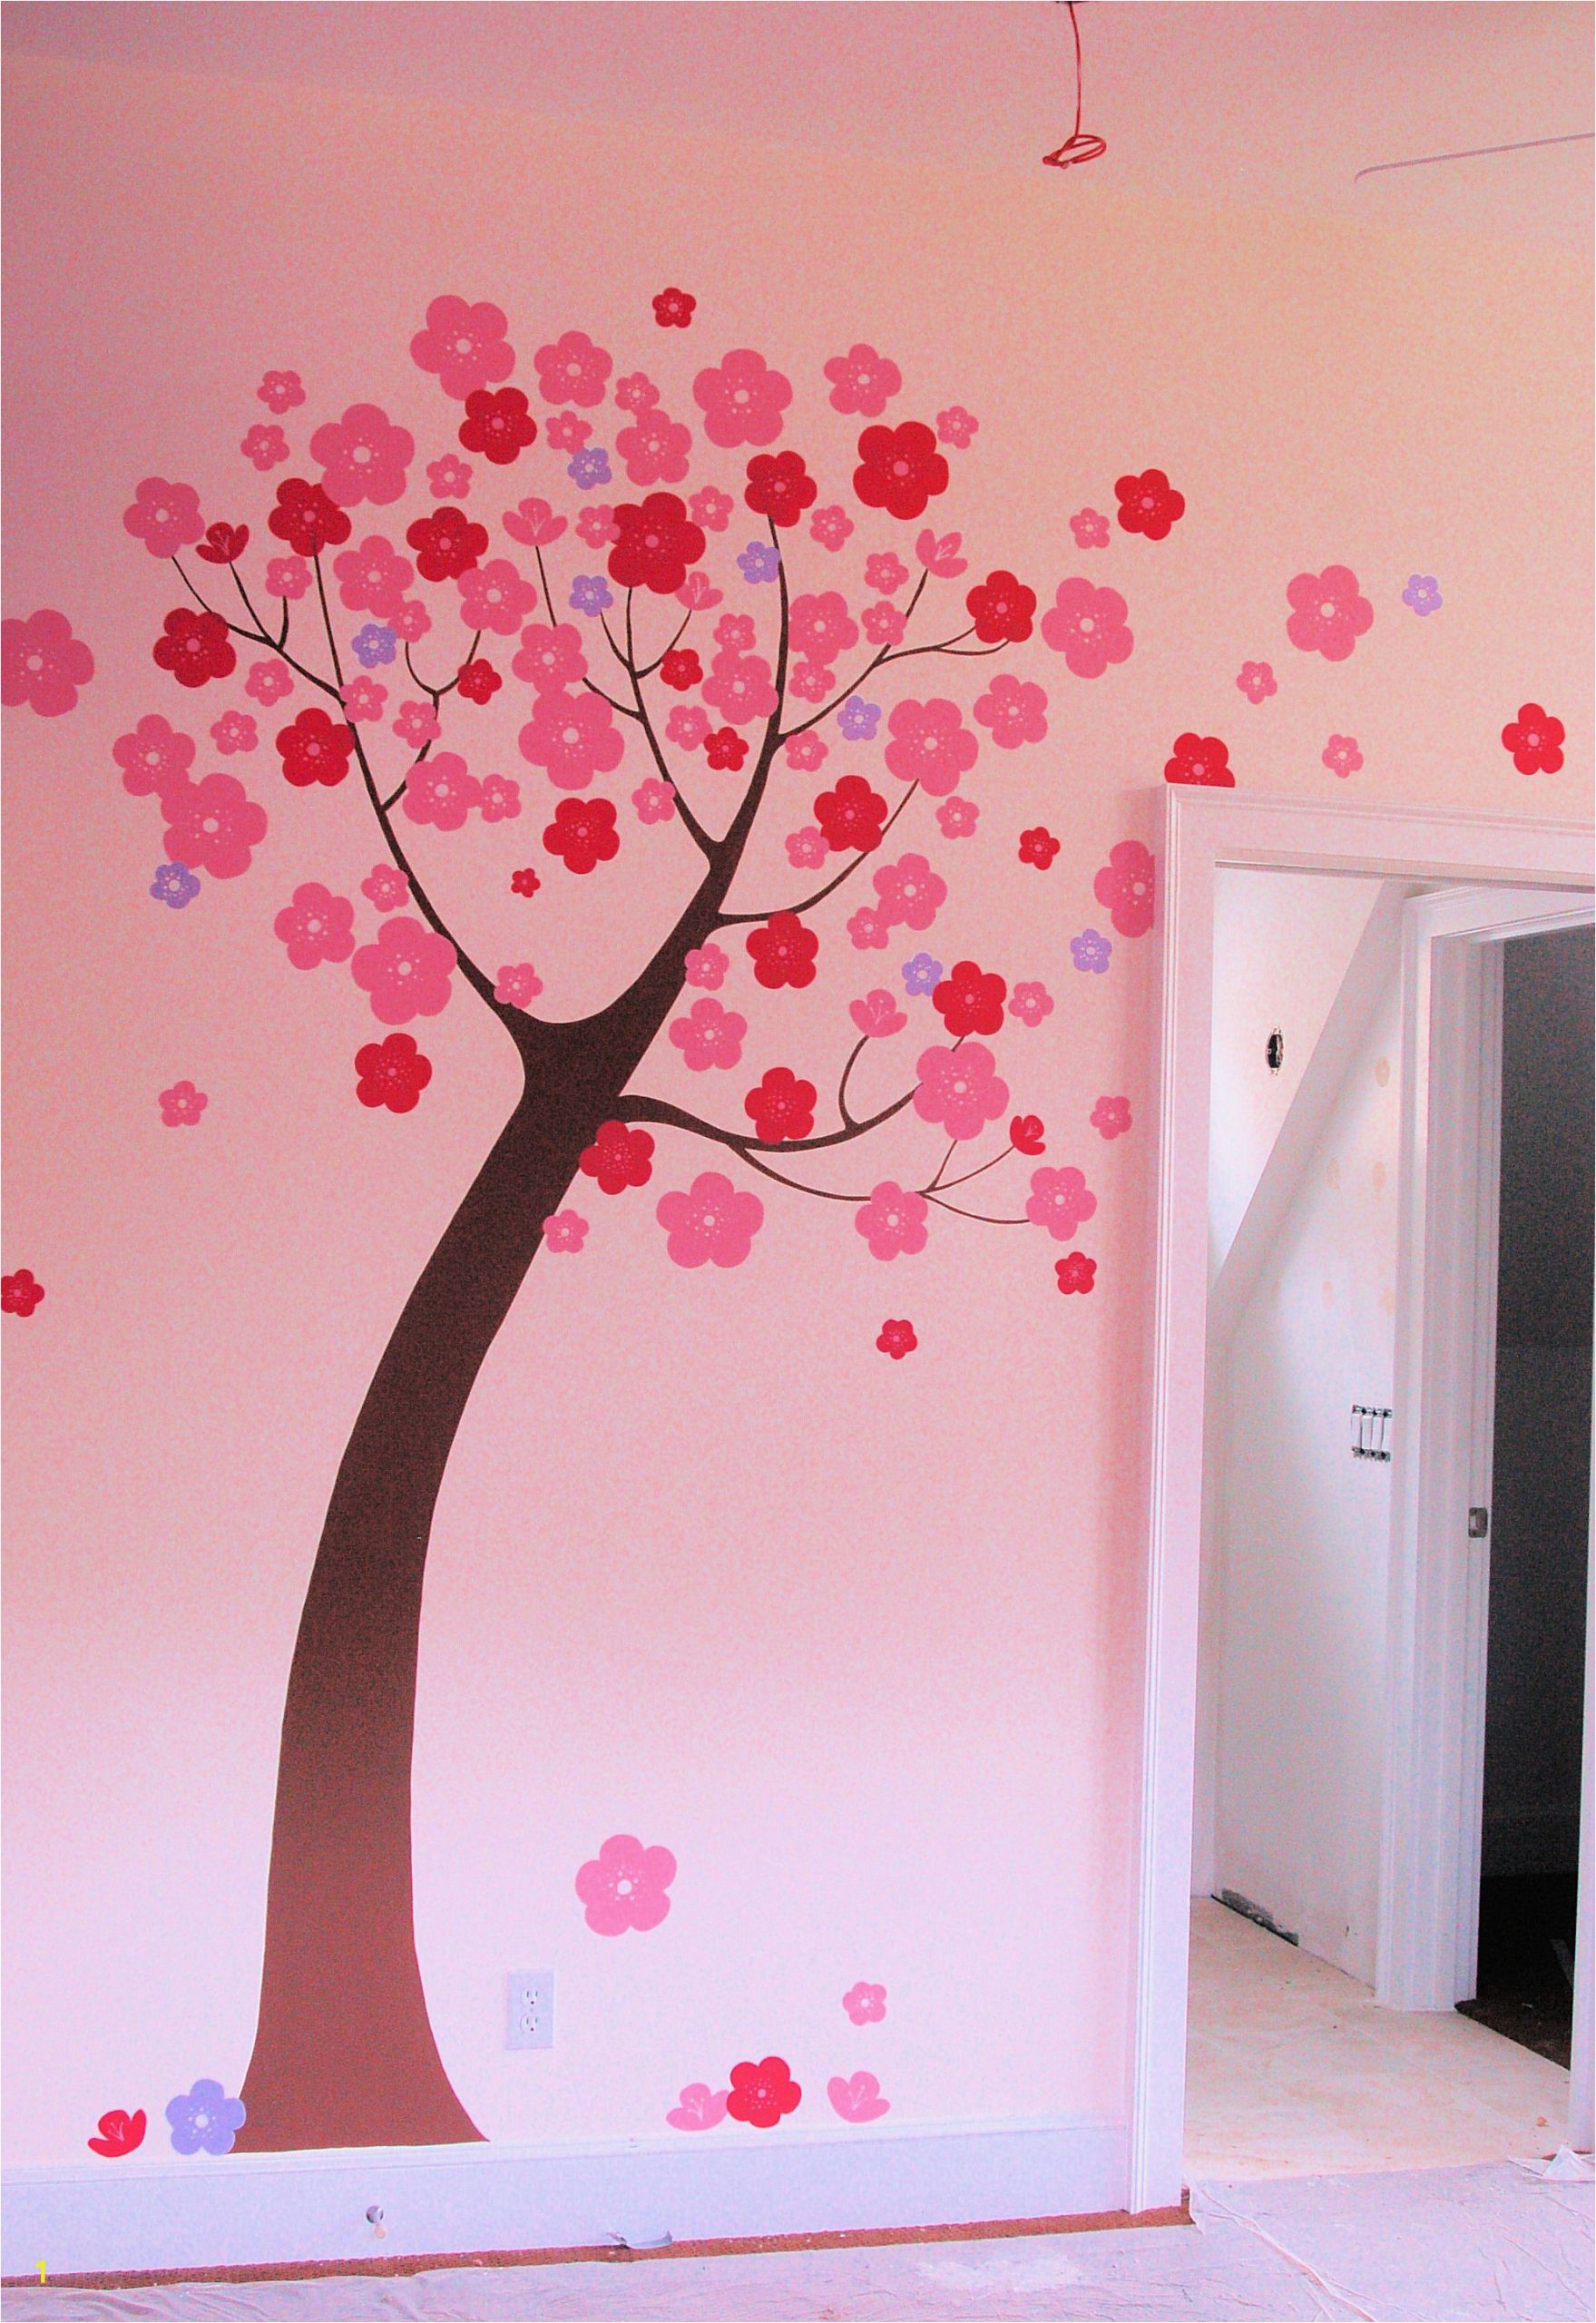 How to Paint A Wall Mural Tree Hand Painted Stylized Tree Mural In Children S Room by Renee